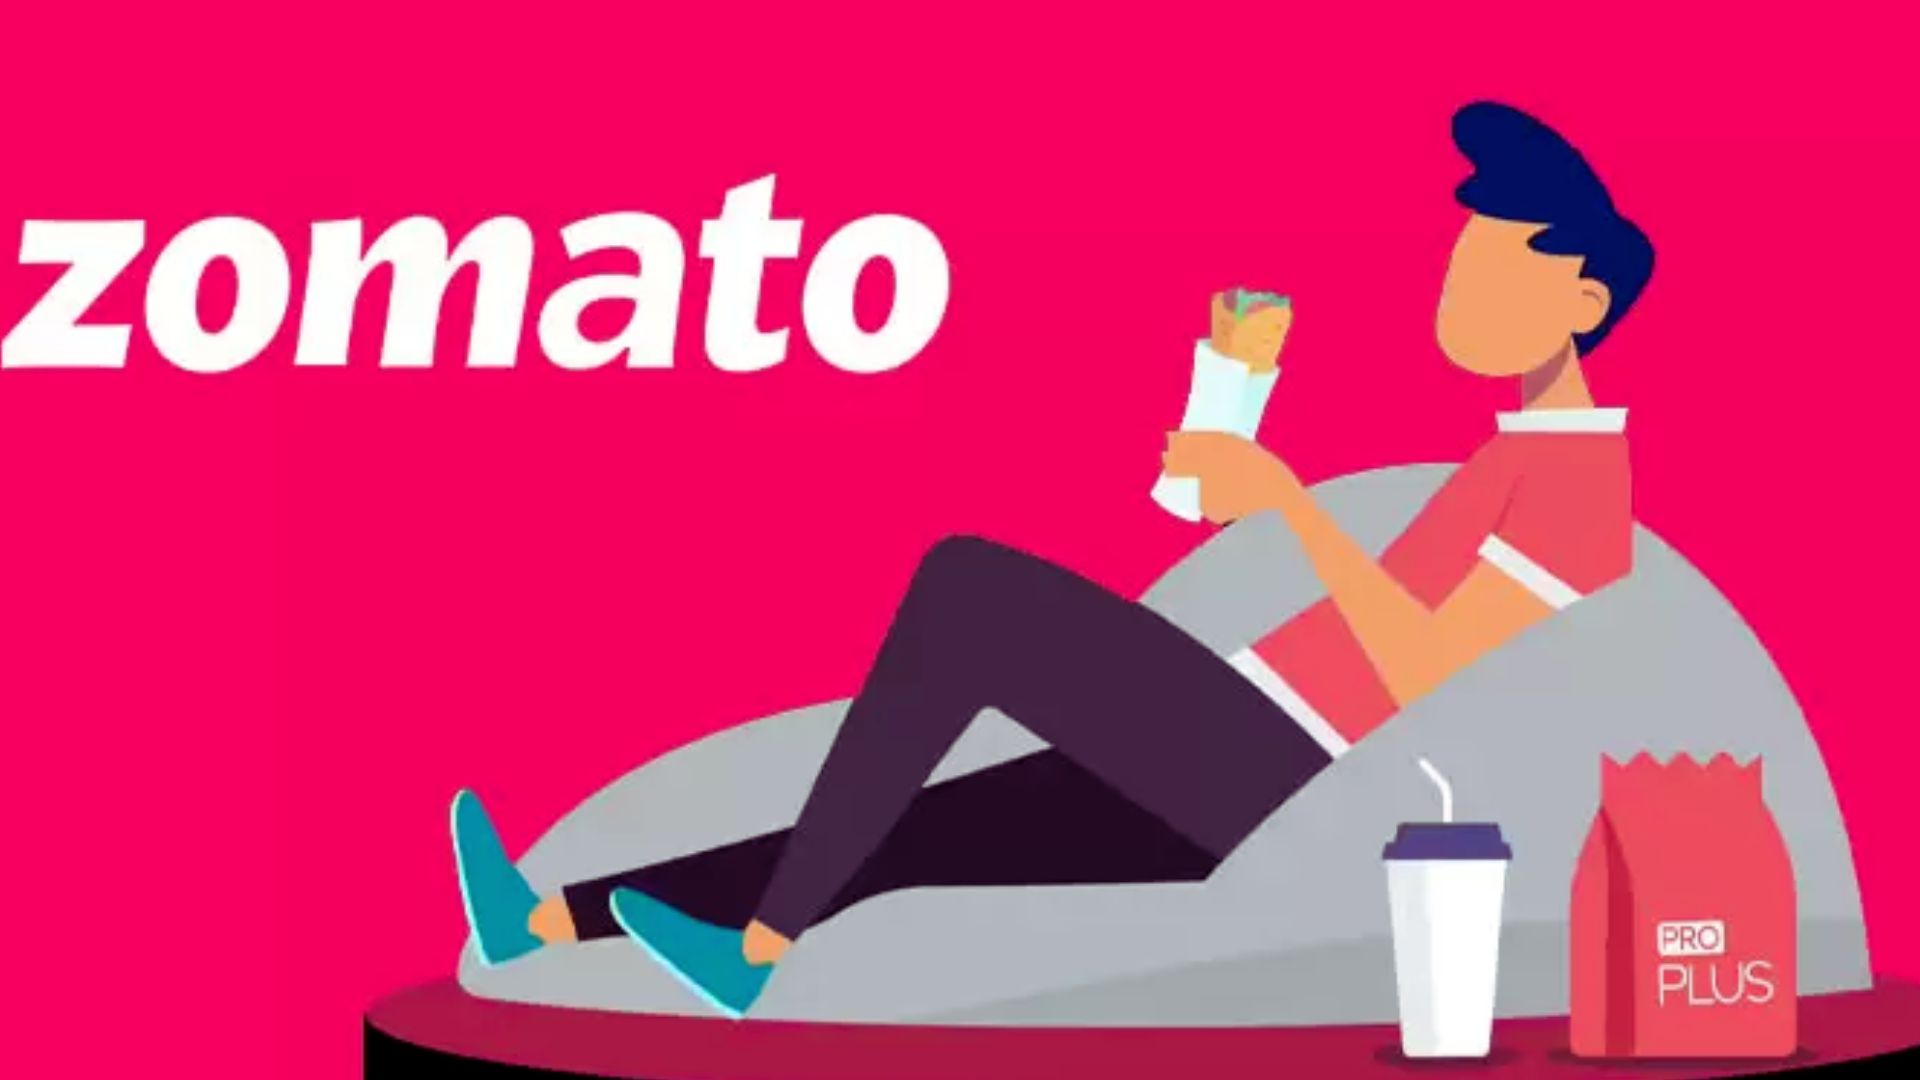 How to Get Zomato Pro Plus? 5 Easy Steps